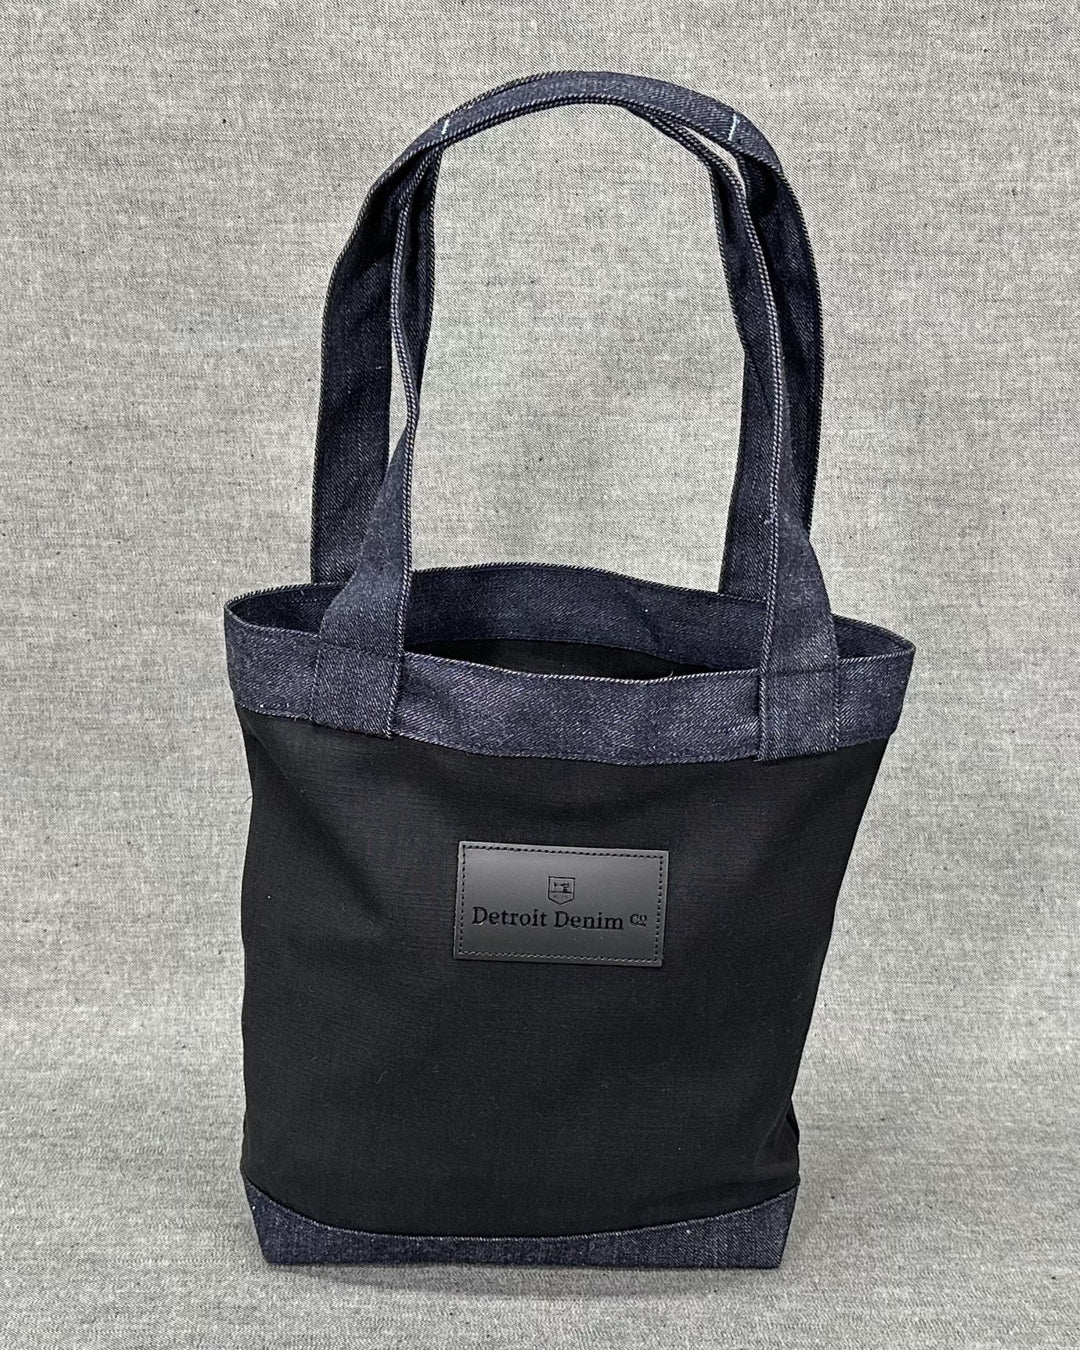 The Black and Blue Tote